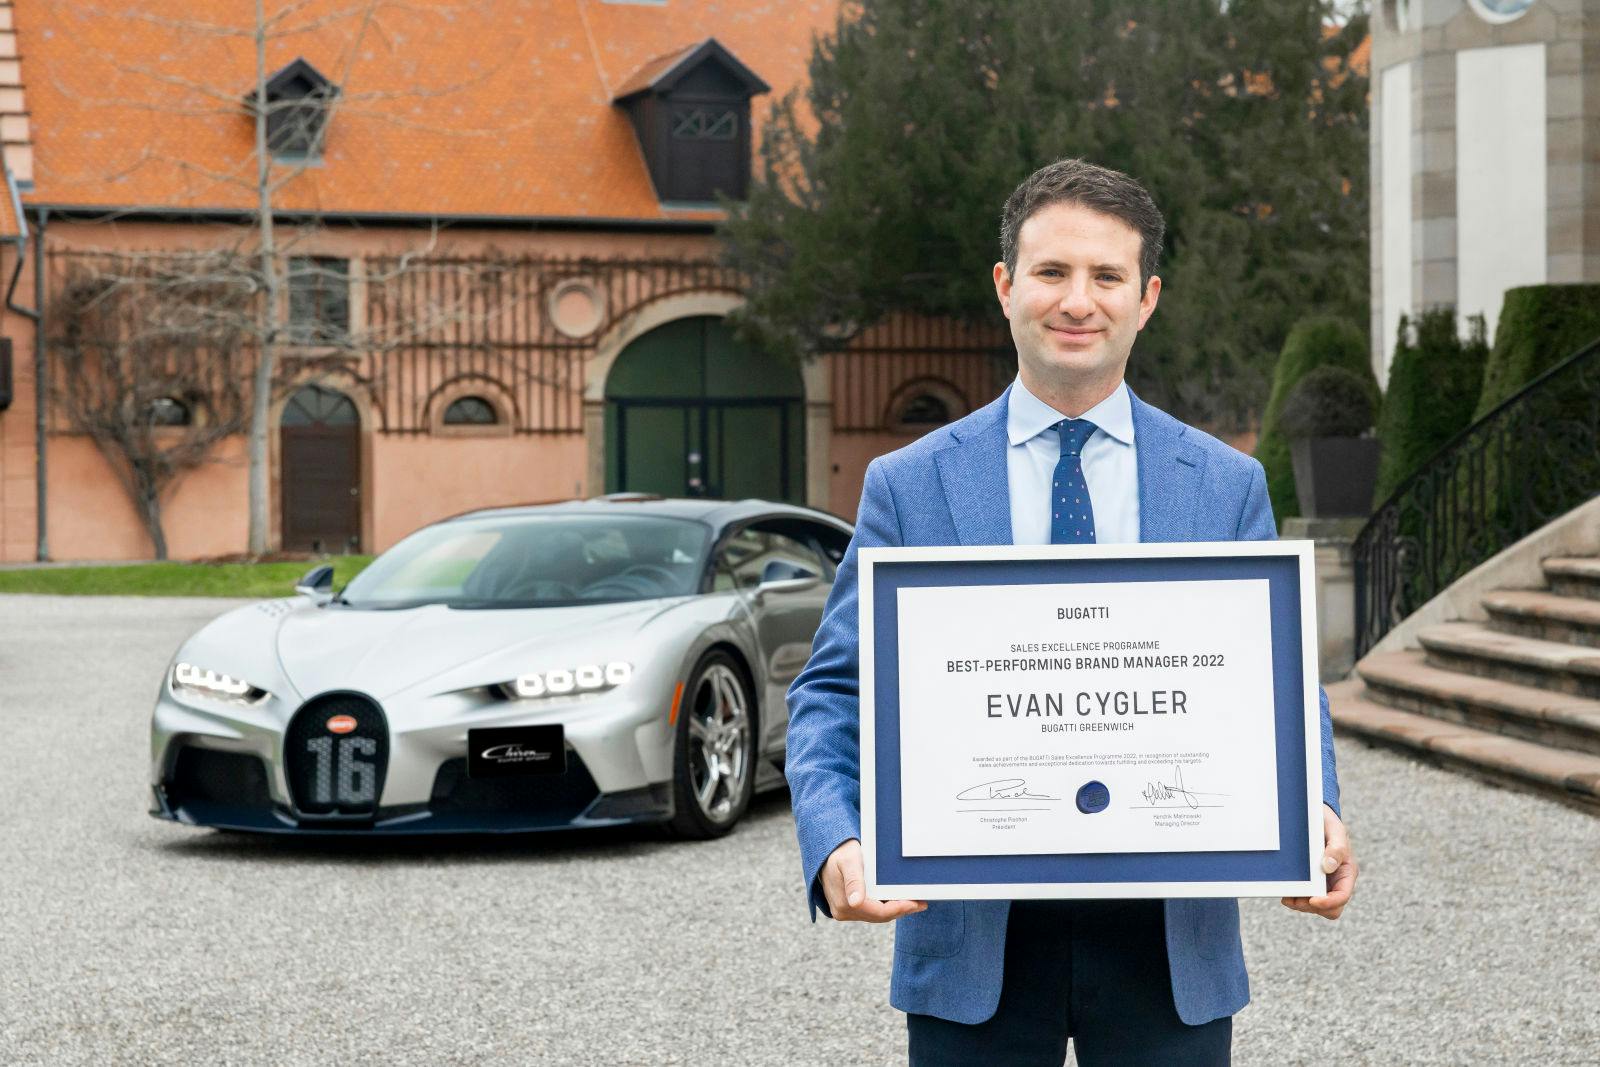 As the winner of the Bugatti Sales Excellence Programme 2022, Evan Cygler will drive a Chiron Super Sport at over 400 km/h on the Cape Canaveral circuit in Florida.